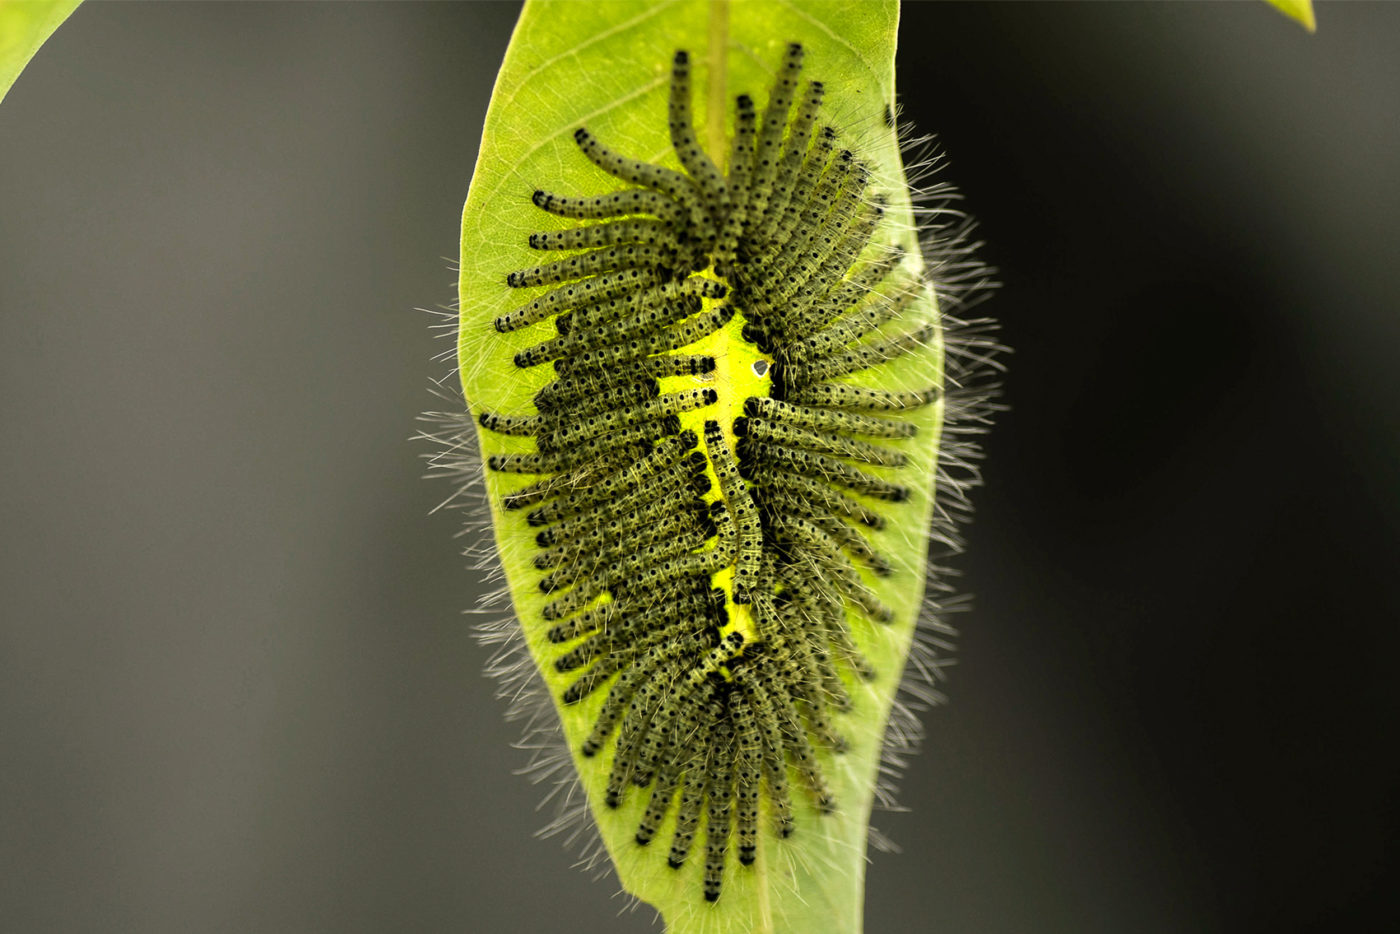 Tightly packed caterpillars on a green leaf